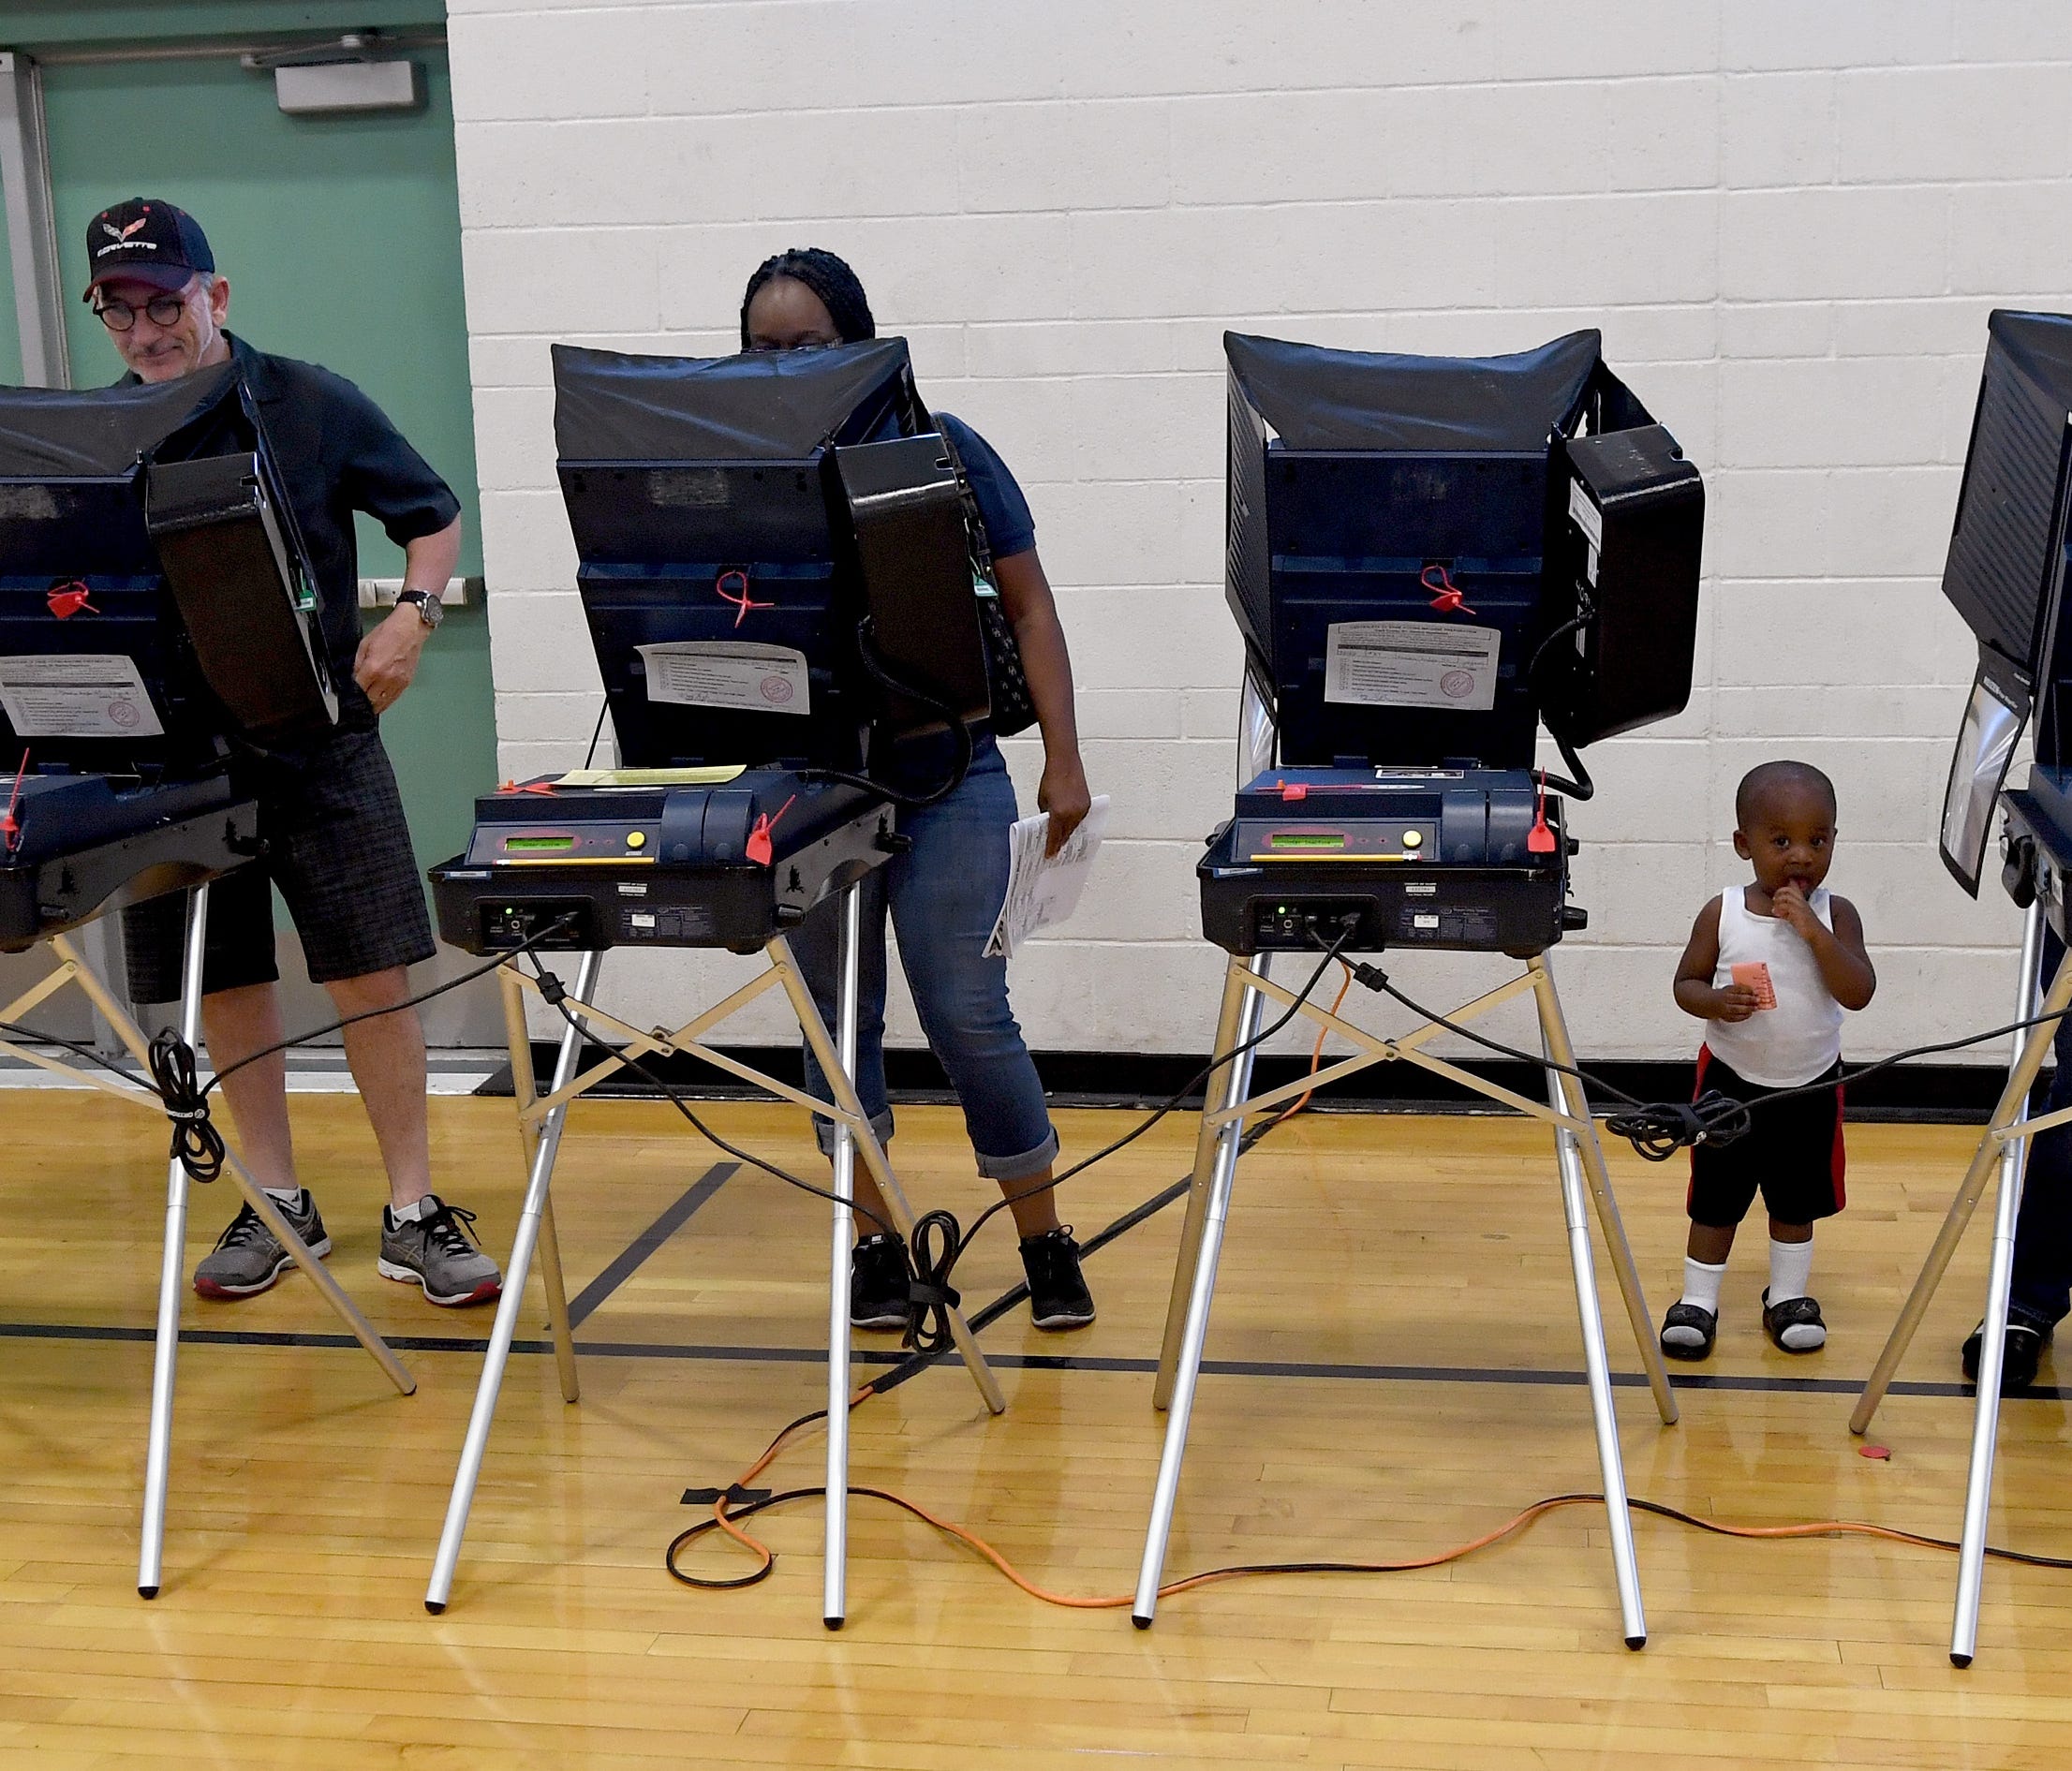 Voters cast their ballots at voting machines at on Election Day, November 8, 2016 in Las Vegas, Nevada.